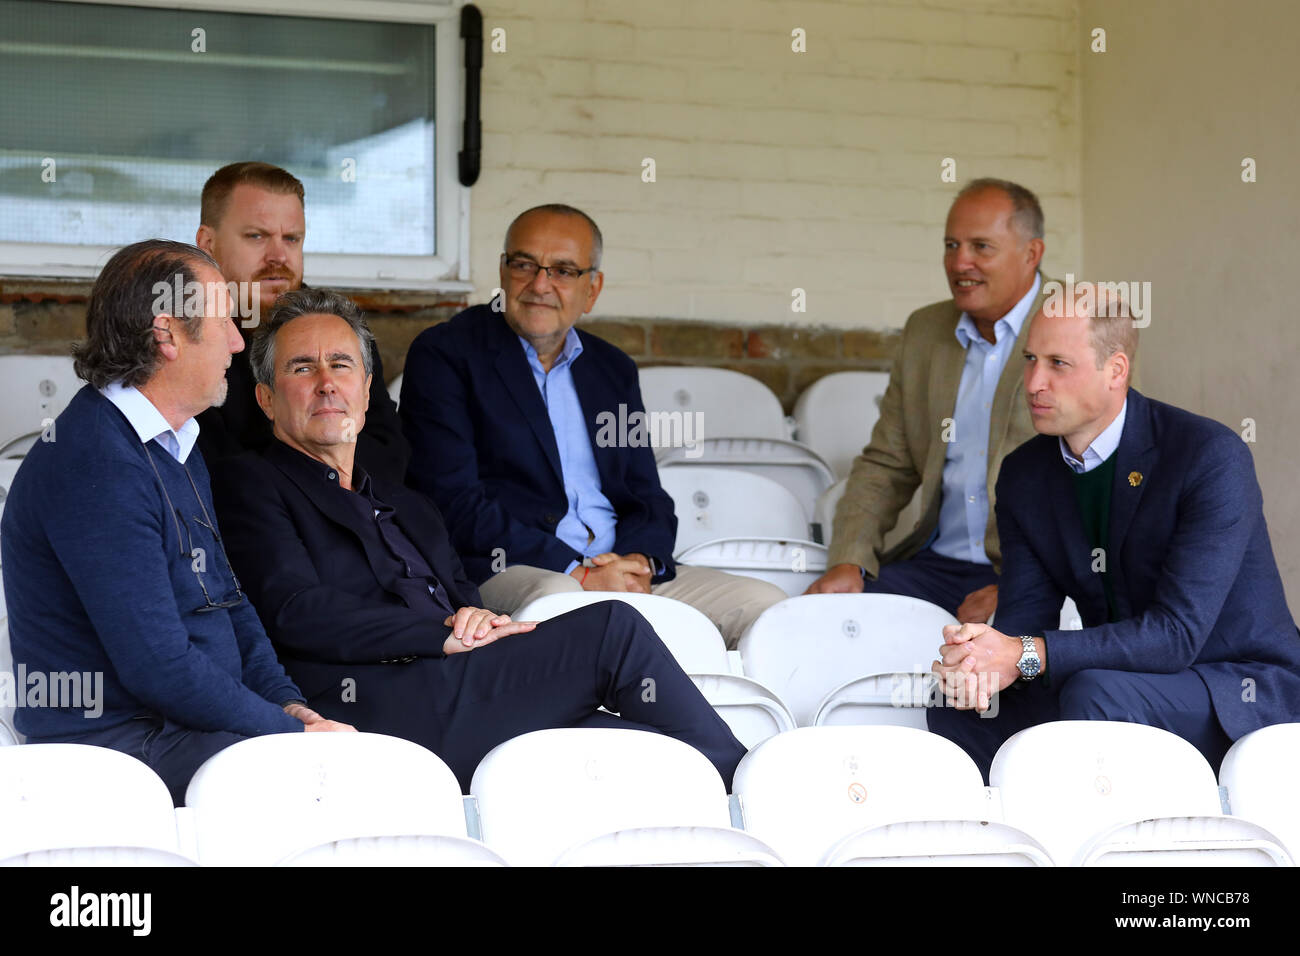 Duke of Cambridge and Rob Morris, Co-Owner of Silver Jubilee Park and Hon Vice President of Hendon FC and Edware Town FC speak to club officials, during his visit to Hendon FC in London to learn more about the club's mental health outreach initiatives. PA Photo. Picture date: Friday September 6, 2019. See PA story ROYAL Cambridge. Photo credit should read: Tim Whitby/PA Wire Stock Photo